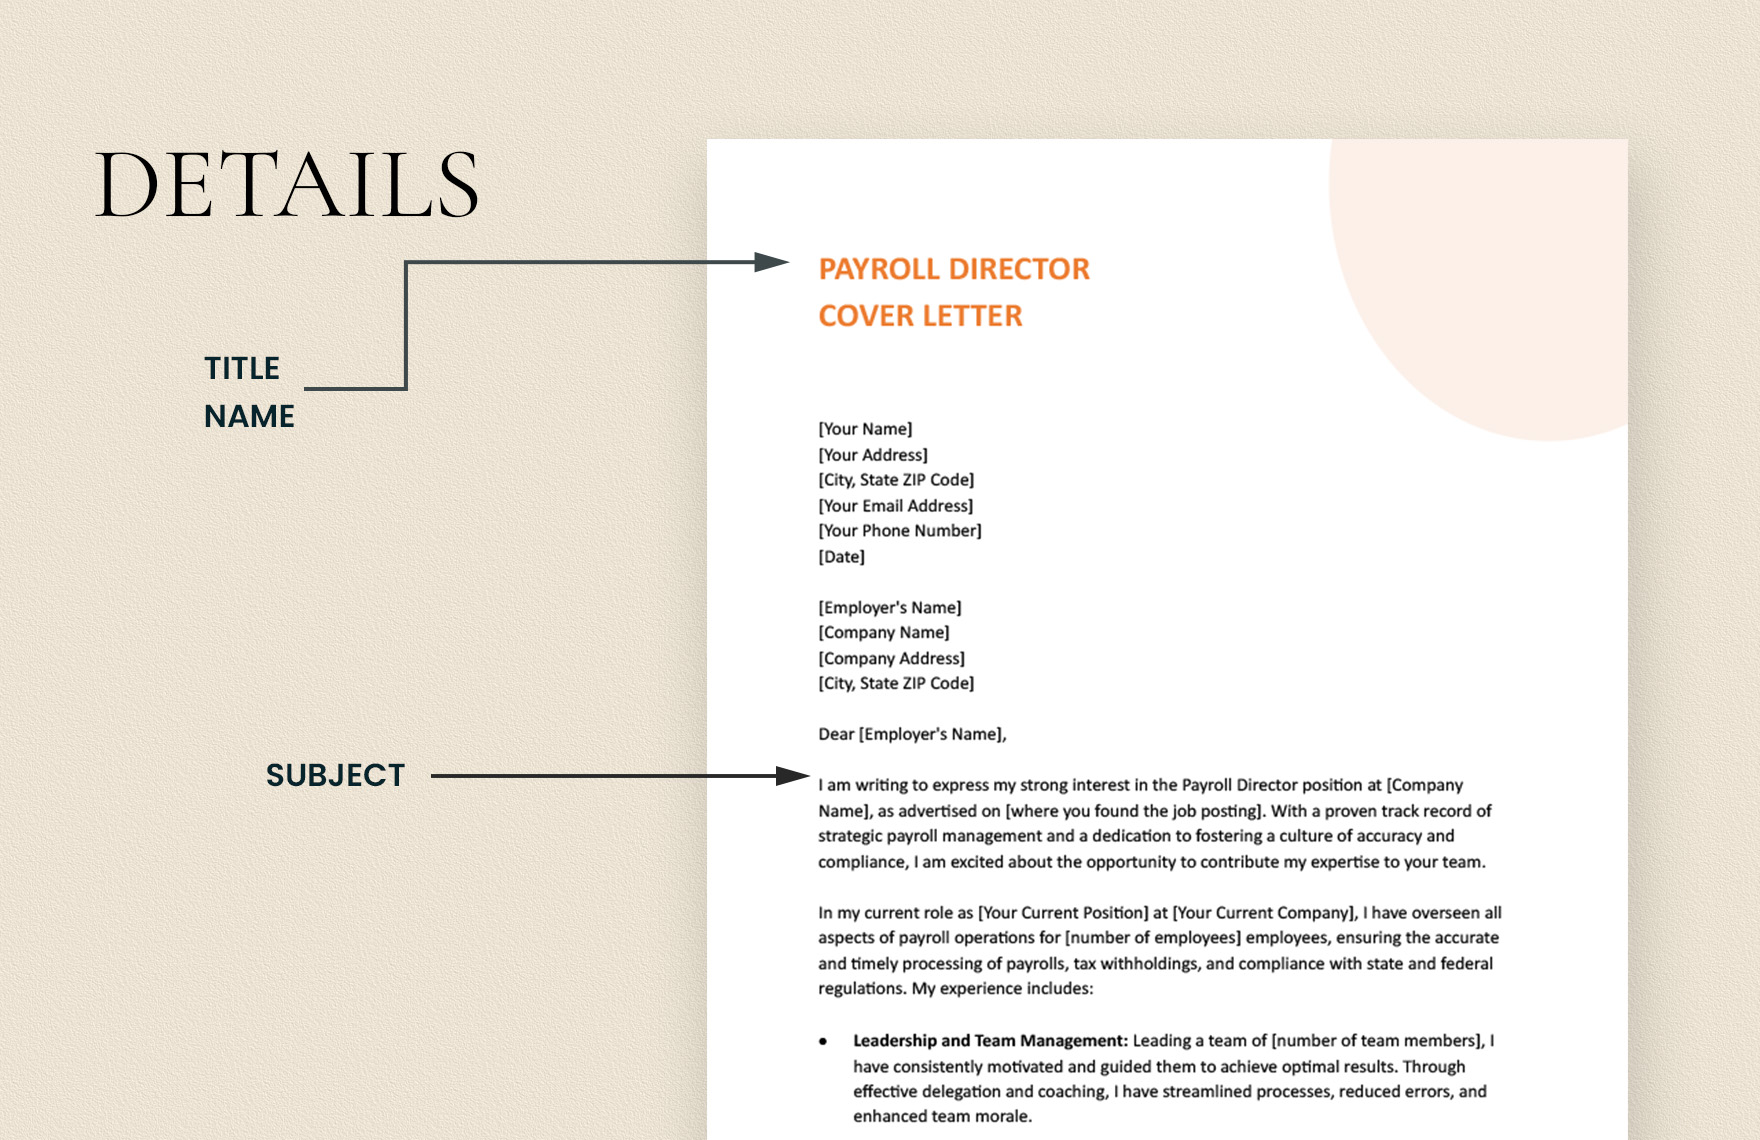 Payroll Director Cover Letter